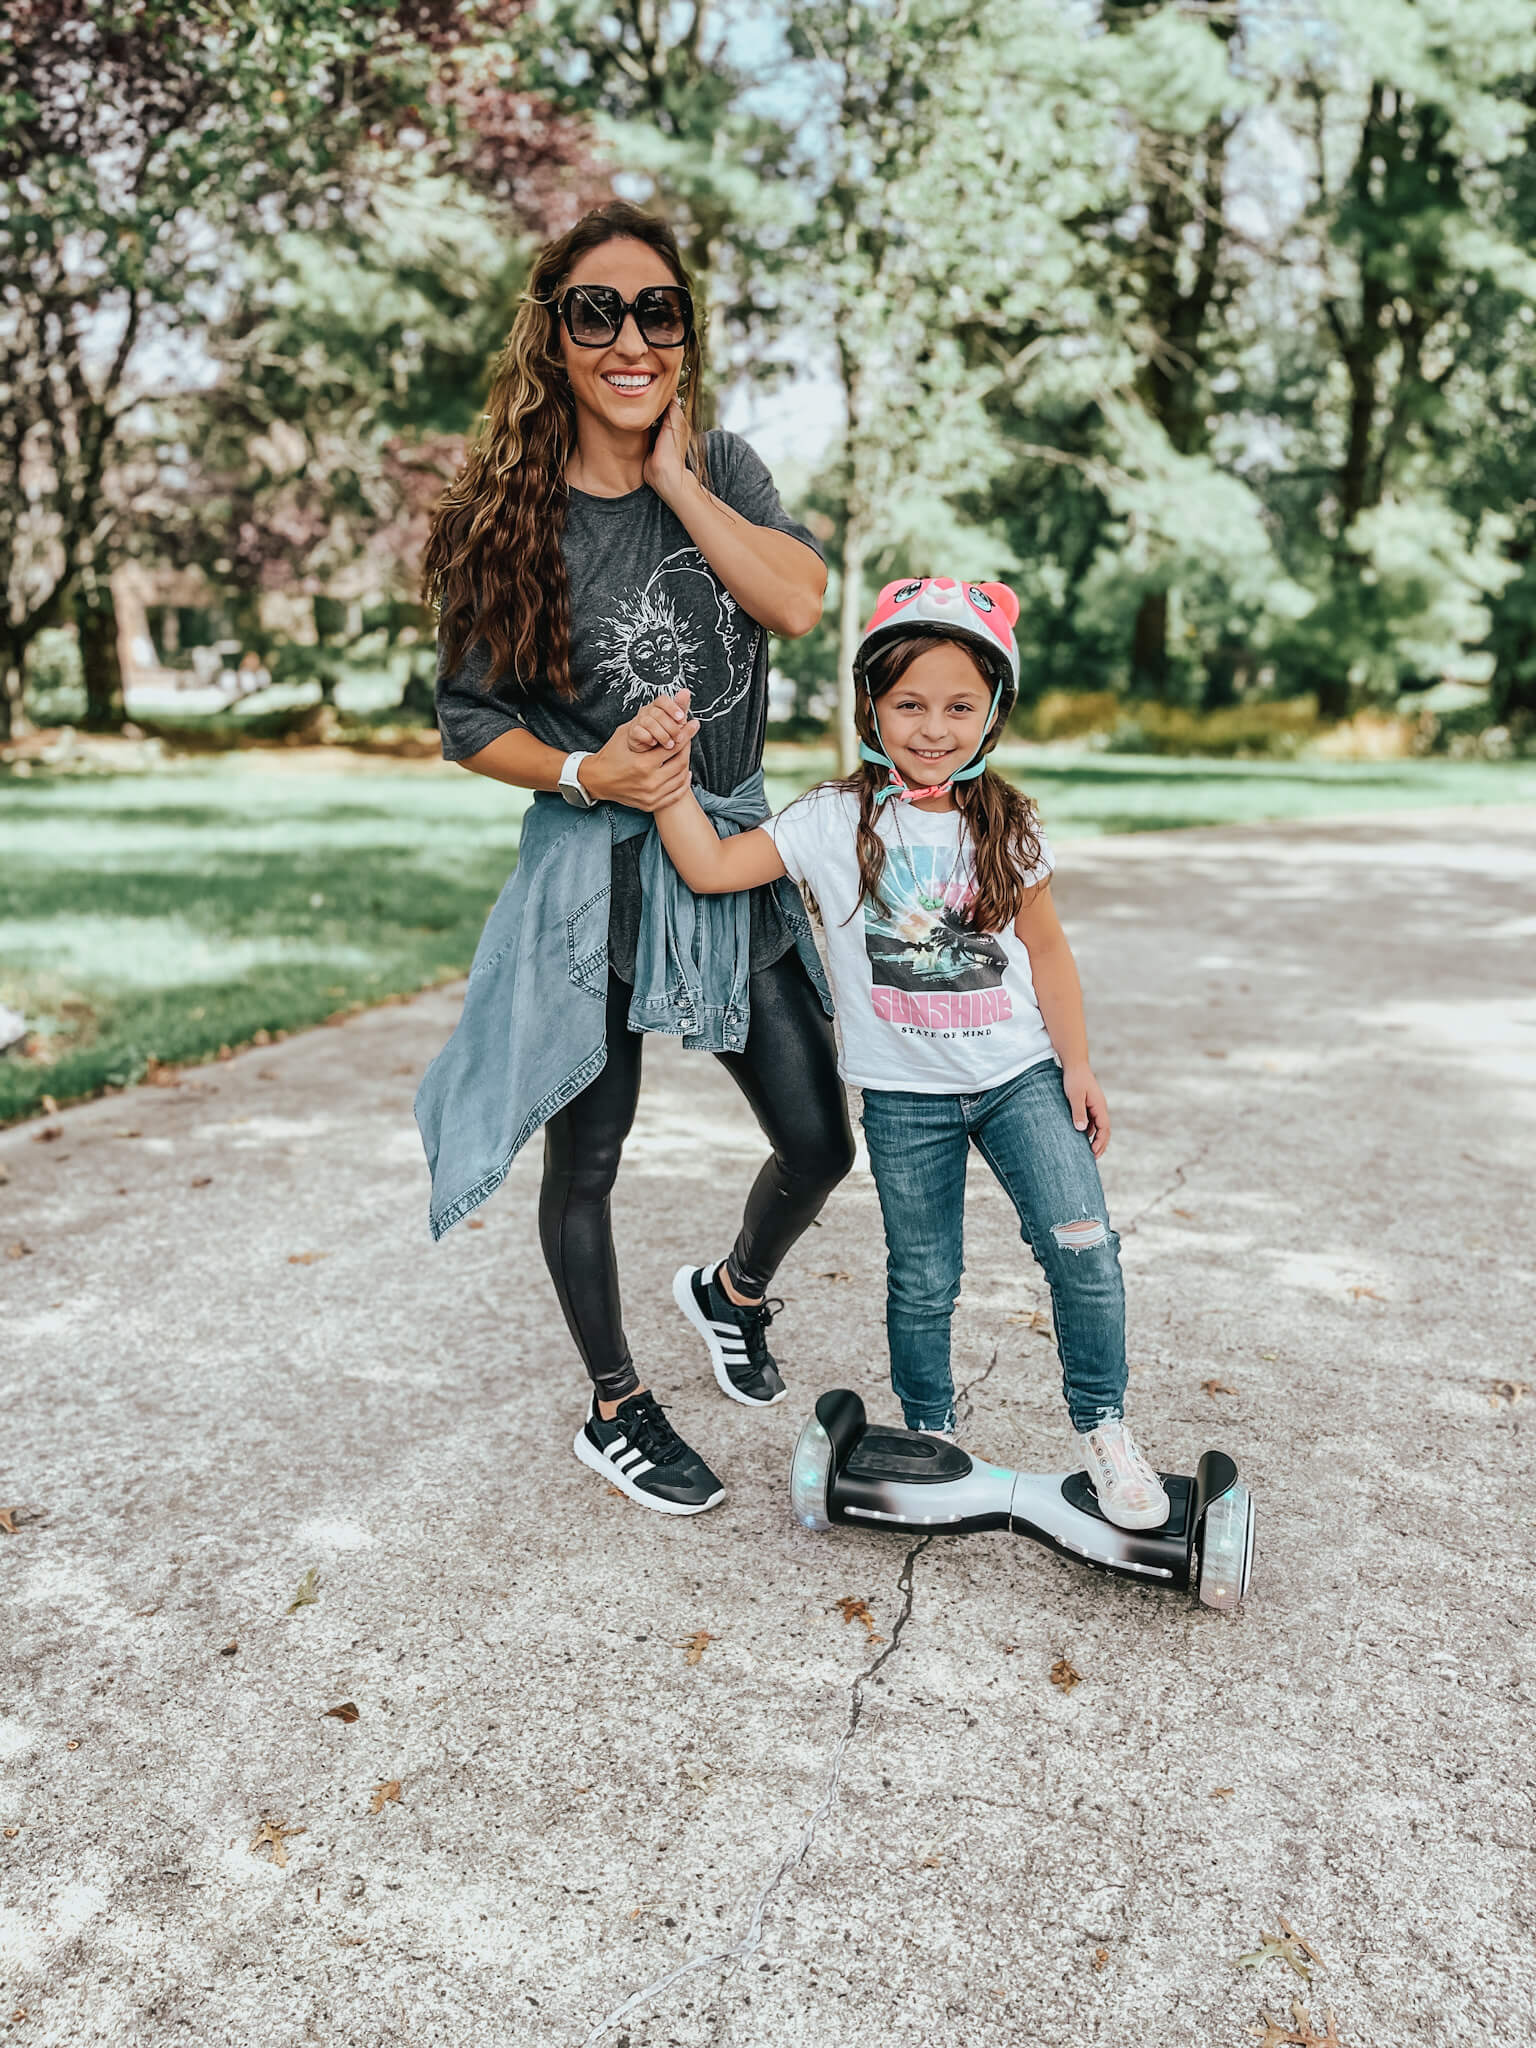 mom and daughter on hoverboard - outdoor gifts for kids